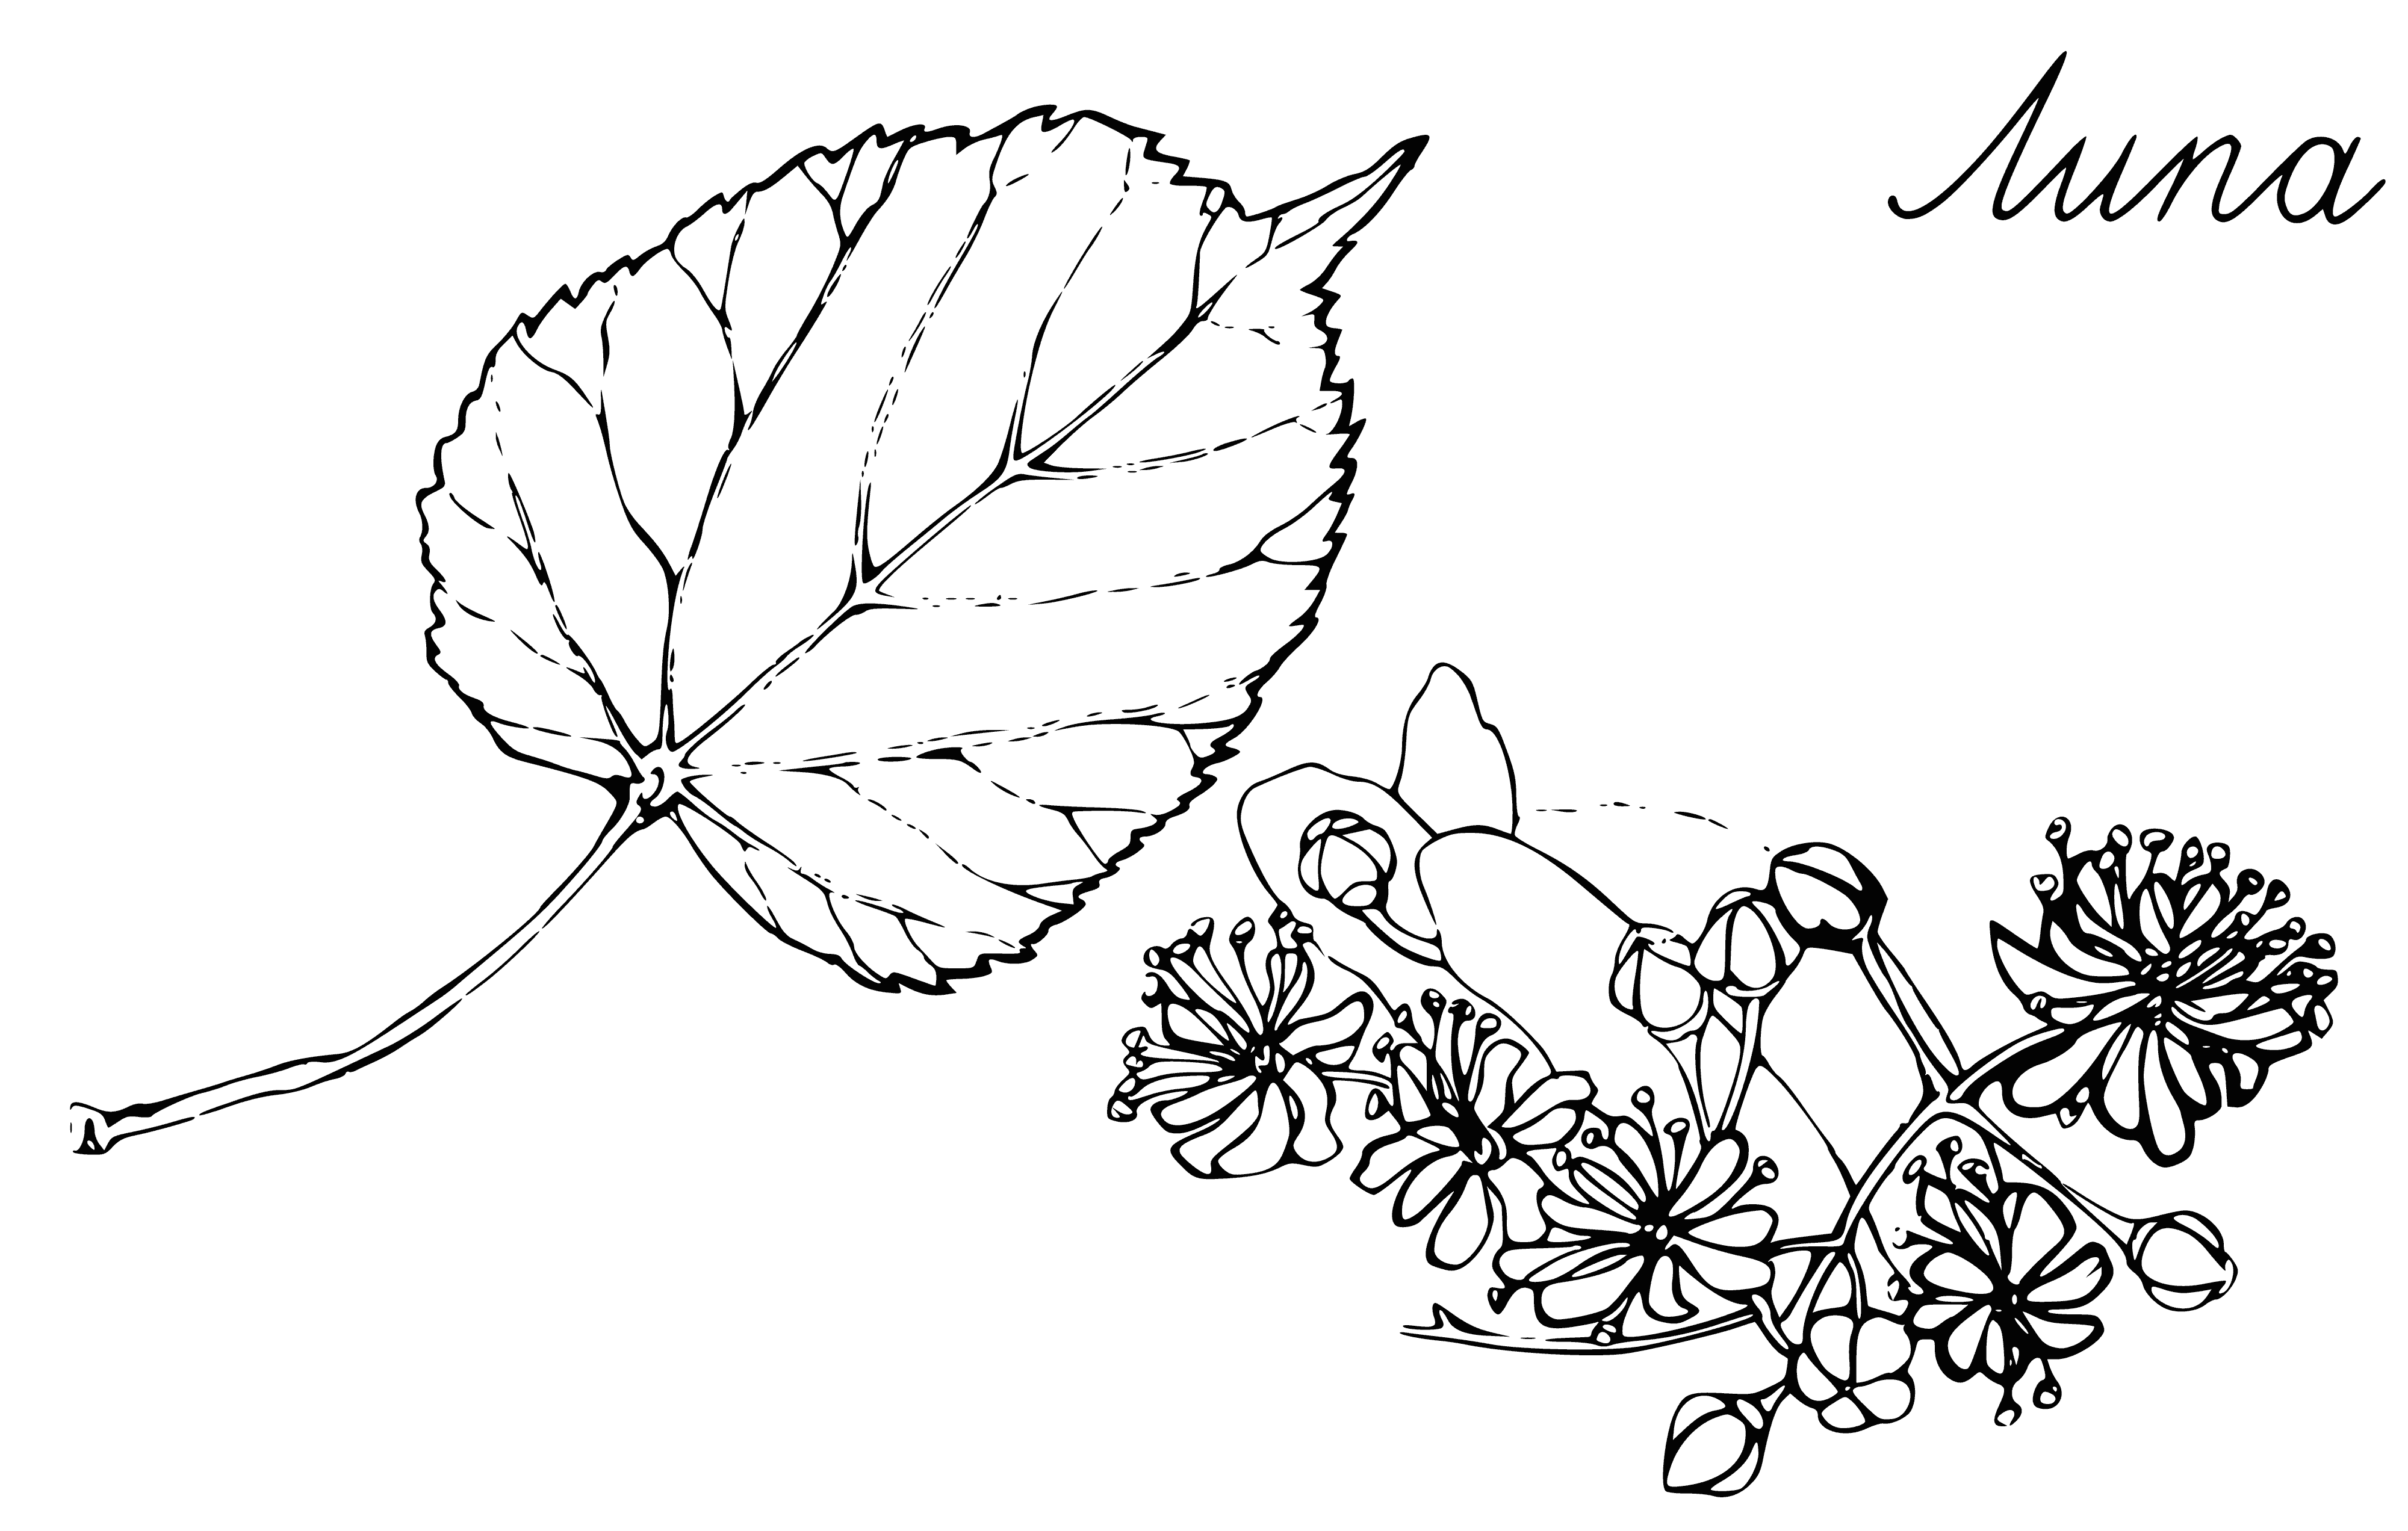 Linden coloring page